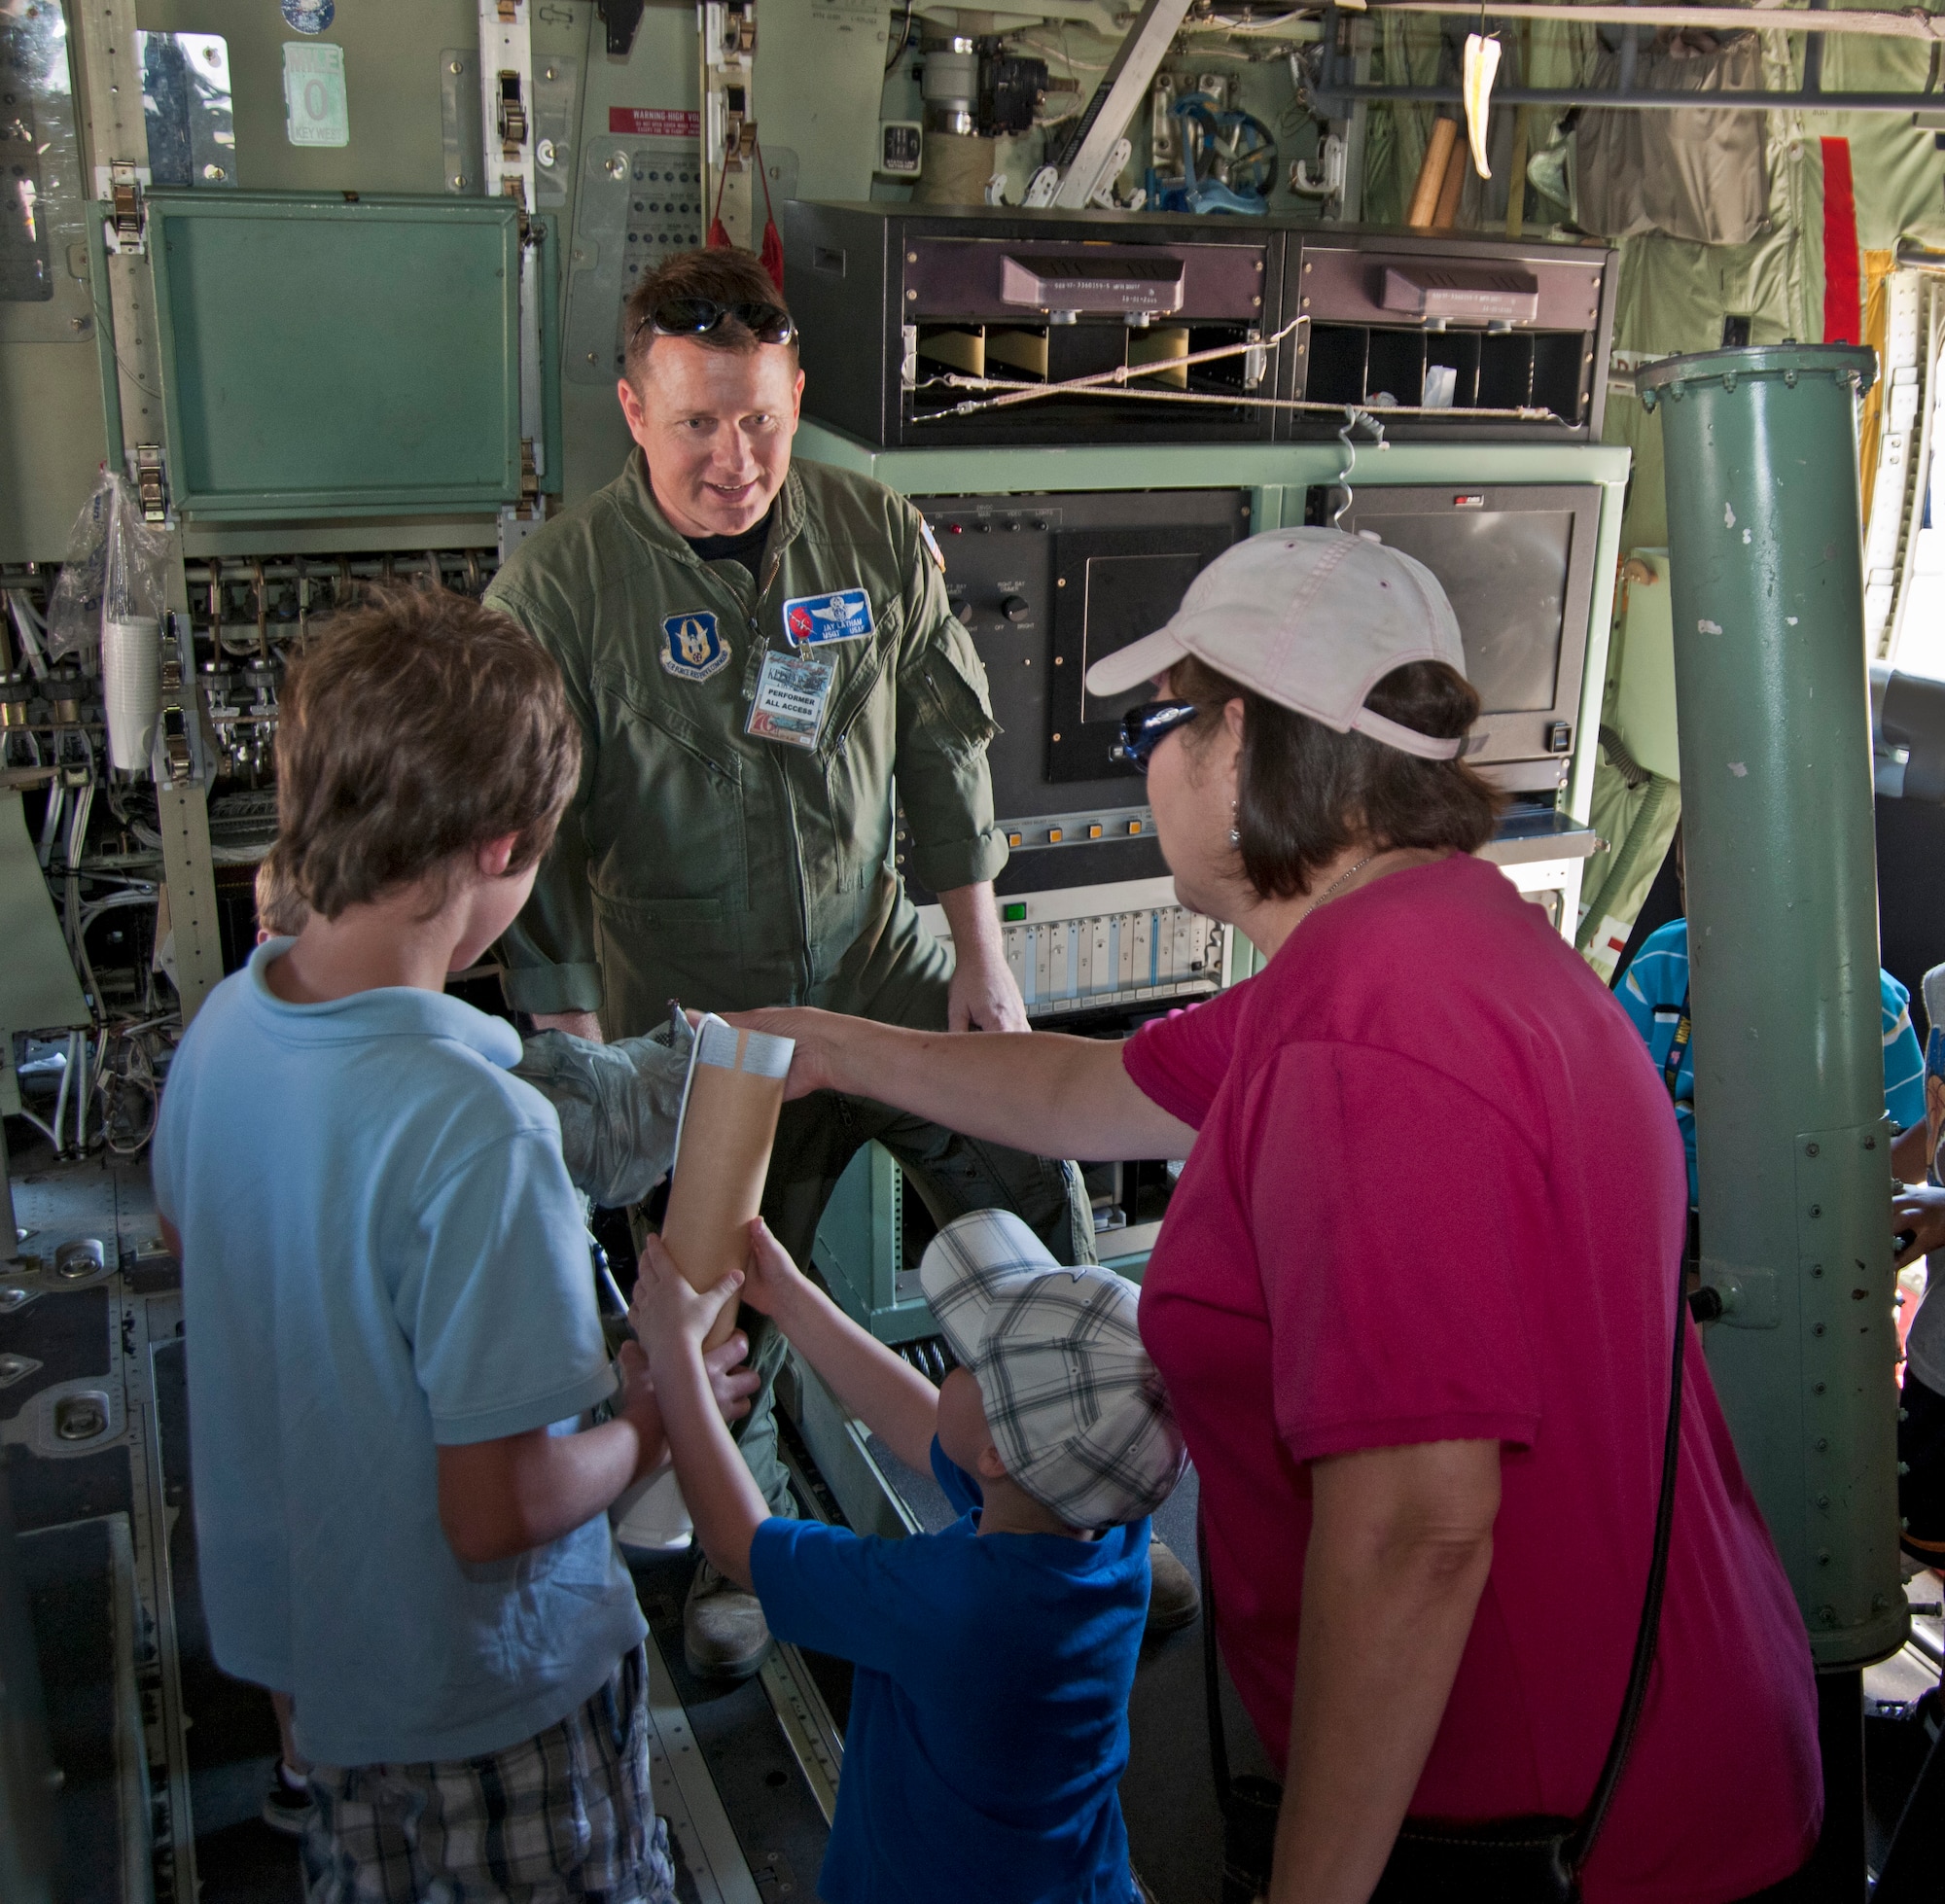 Master Sgt. Joseph Latham, 53rd Weather Reconnaissance Squadron loadmaster, demonstrates the use of a dropsonde to Zach Seal, nephew of Barb DeBlasi, 81st Training Wing digital media artist.  Ms. Deblasi and her nephew Zach learned about the Air Force Reserve's "Hurricane Hunter" mission while aboard a 403rd Wing static display of a WC-130J "Hurricane Hunter" at Keesler Air Force Base, Miss. during an airshow.  More than 160,000 people attended the biannual event here March 19-20.  The dropsonde is a vital piece of equipment used in the 53rd WRS Hurricane Hunter mission.